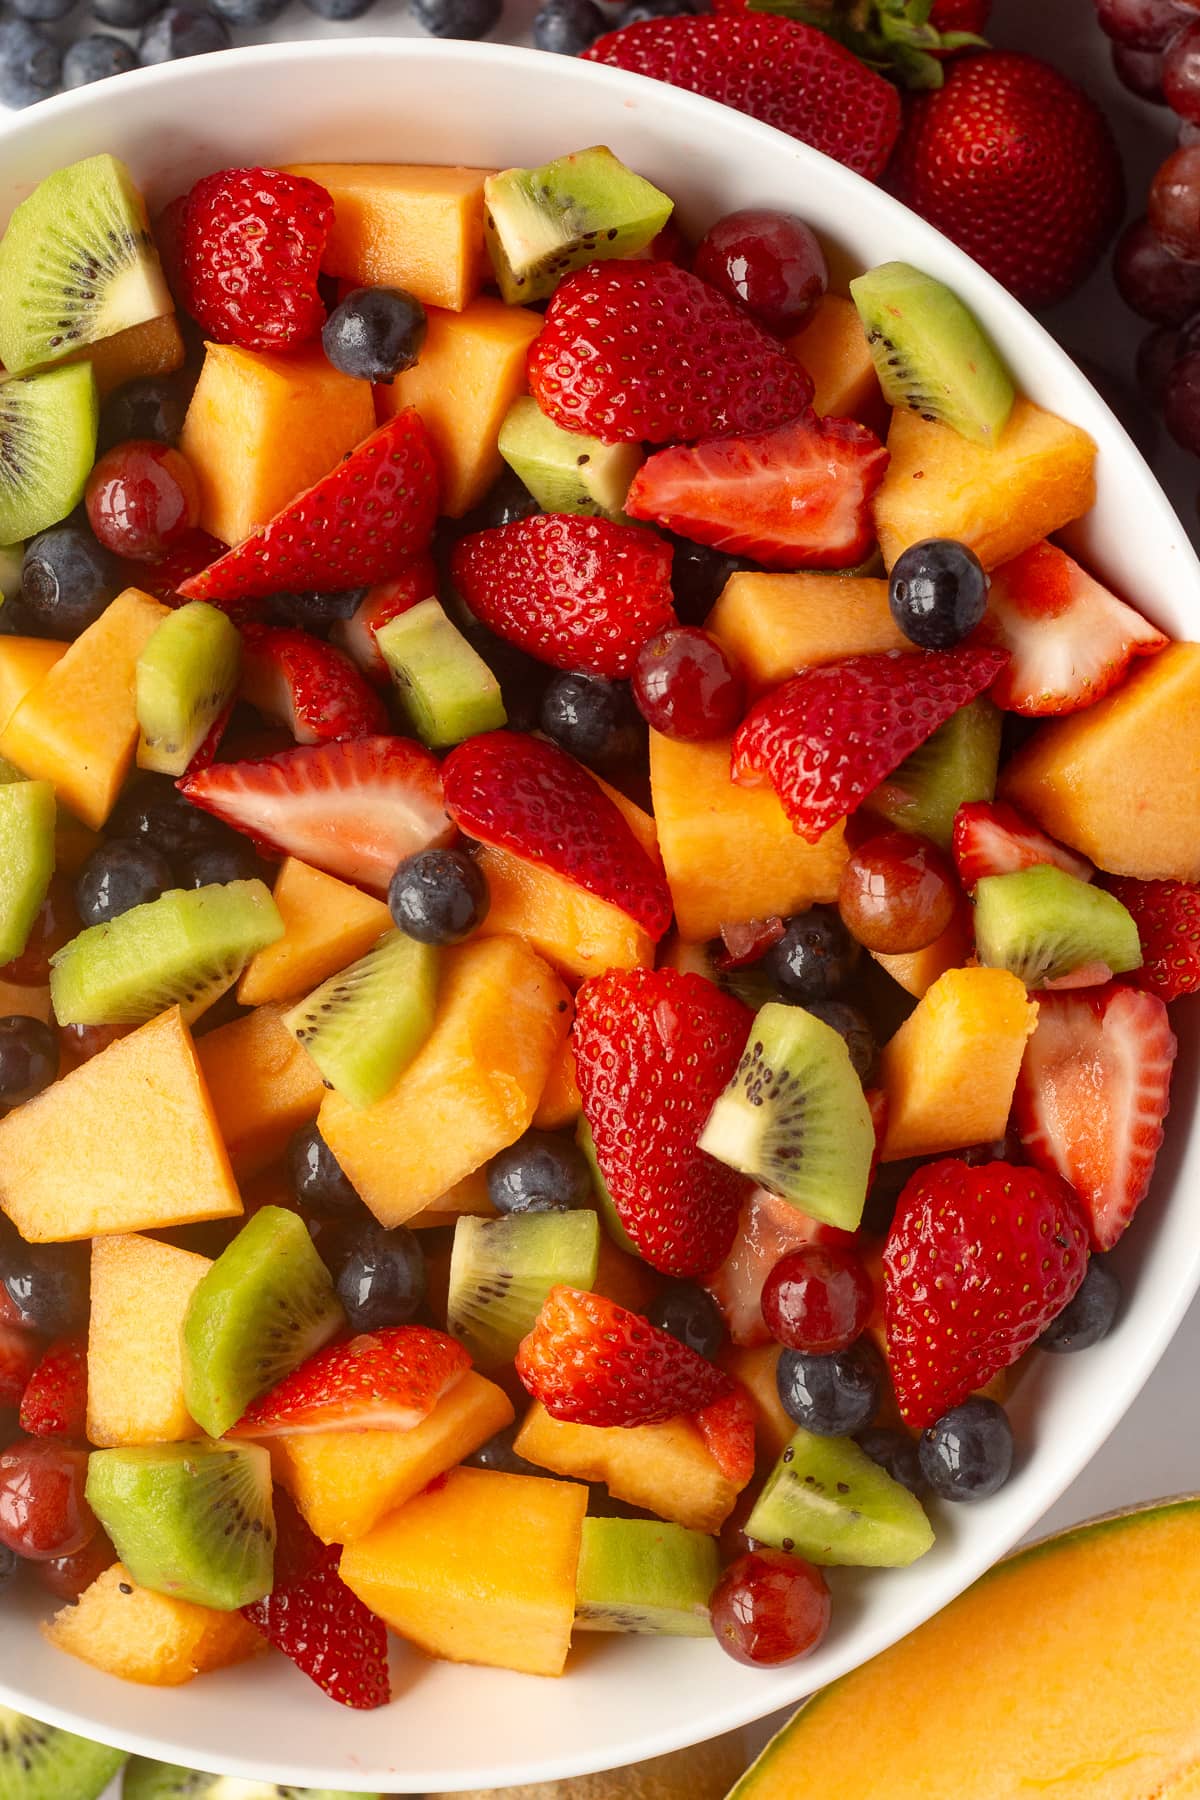 How To Keep Chopped Fruit Salad Fresh At Work